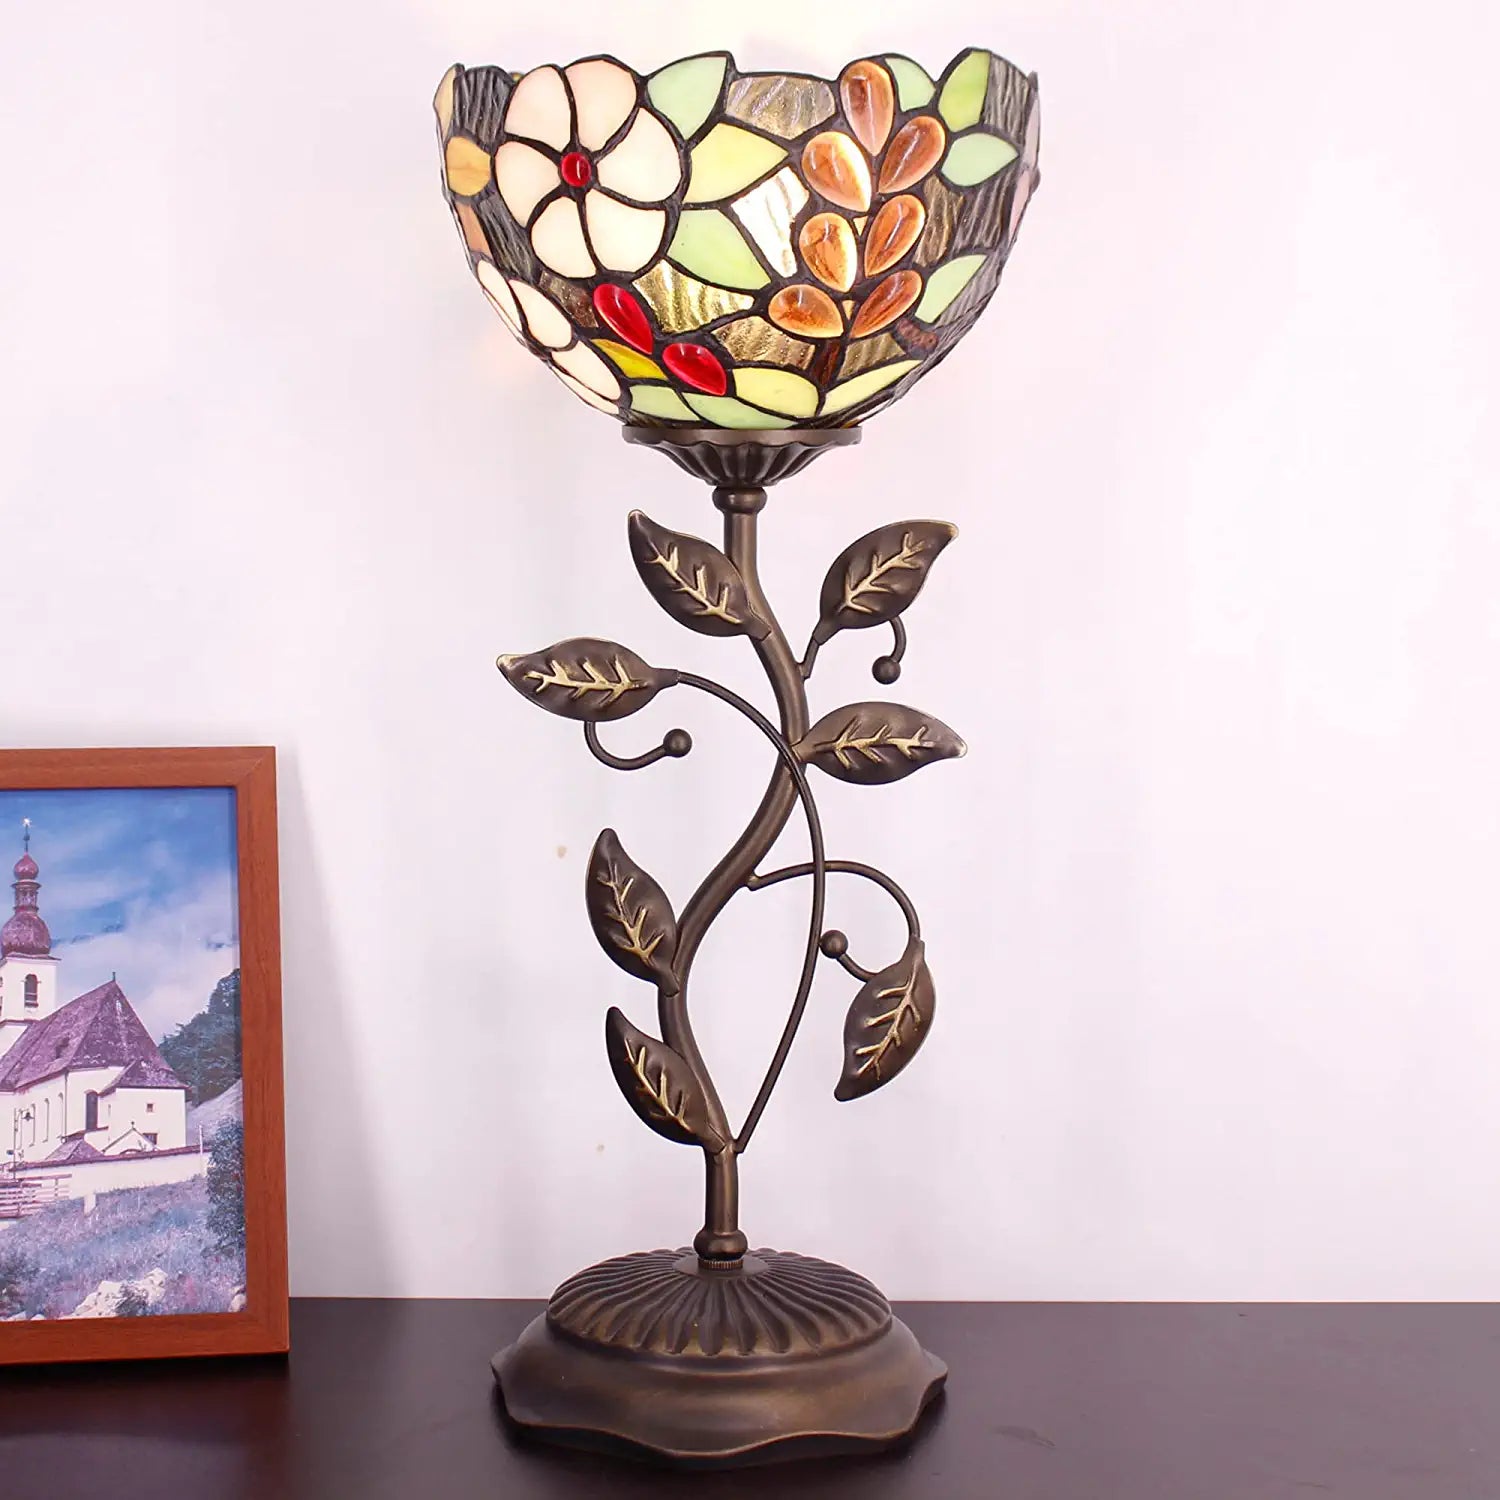 WERFACTORY Small Tiffany Table Lamp 8" Stained Glass Grape Style Shade 19" Tall Antique Vintage Metal Leaf Base Mini Bedside Accent Desk Torchiere Uplight